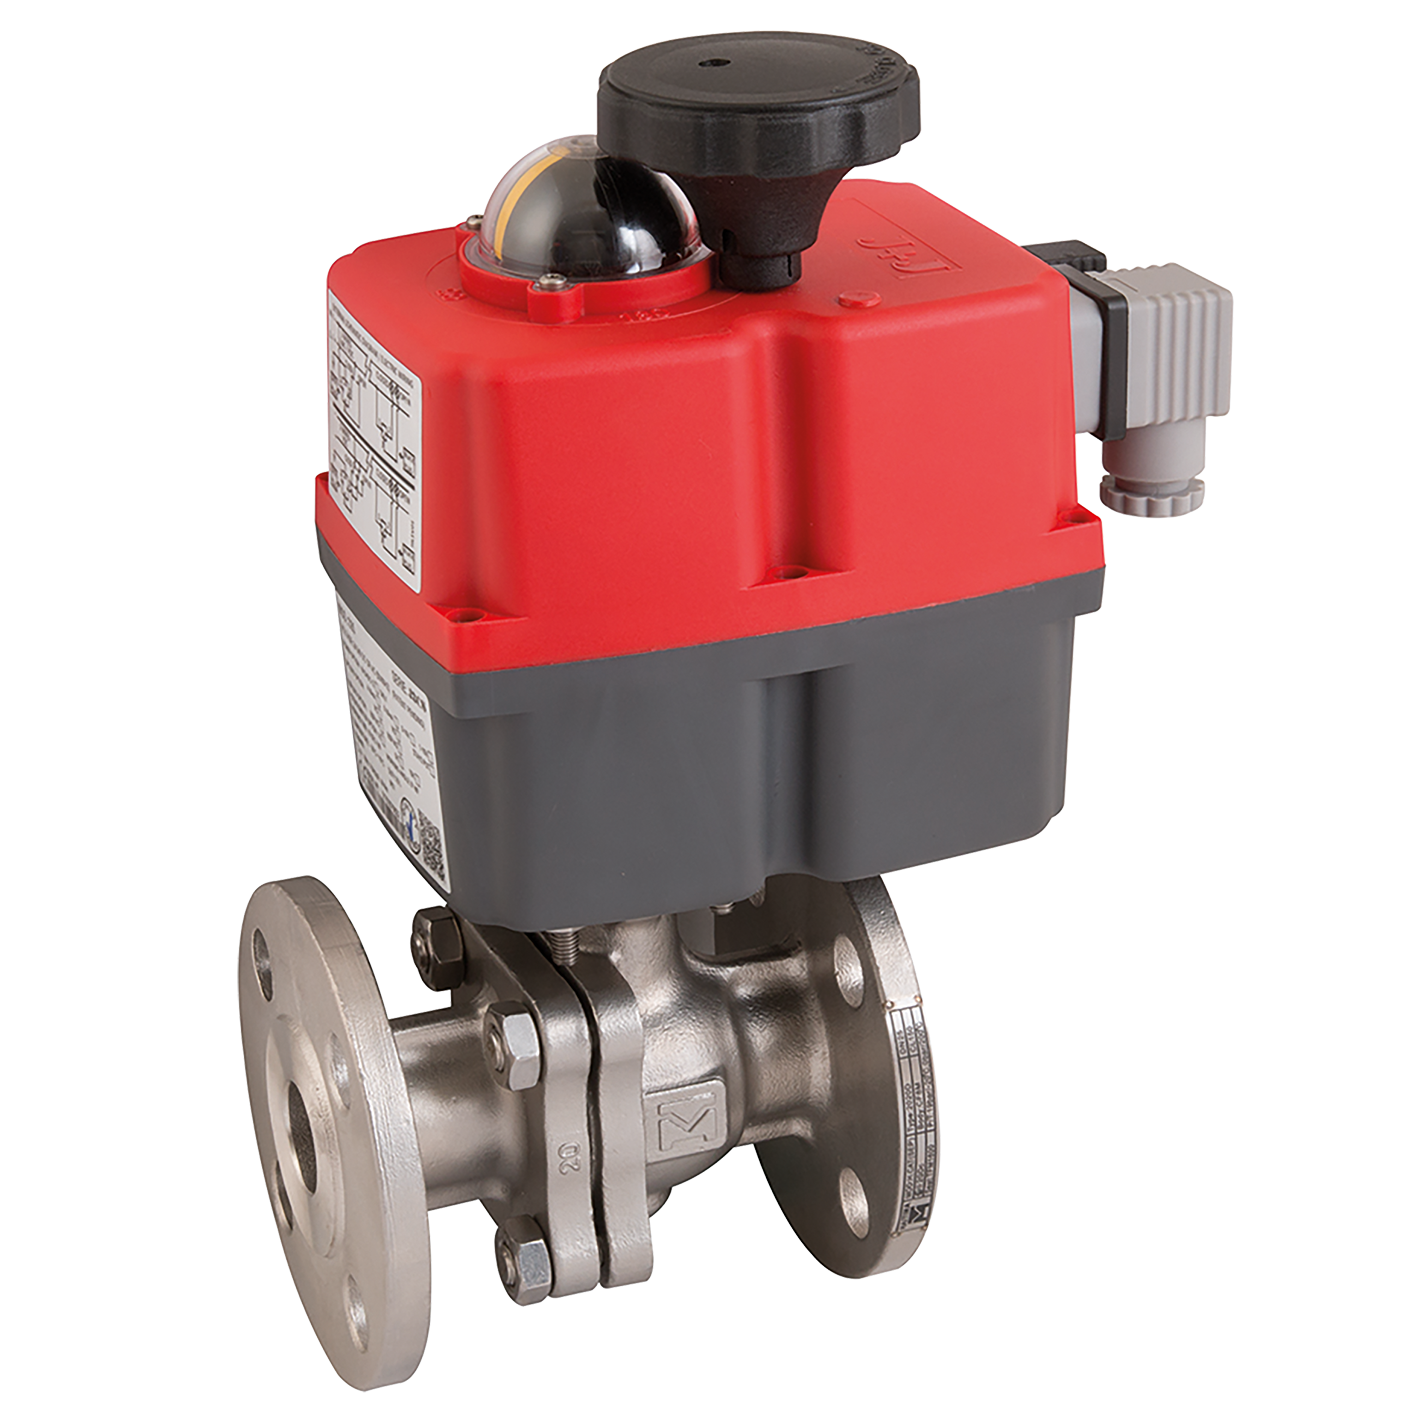 Providers of Electric Actuated Stainless Steel Valve